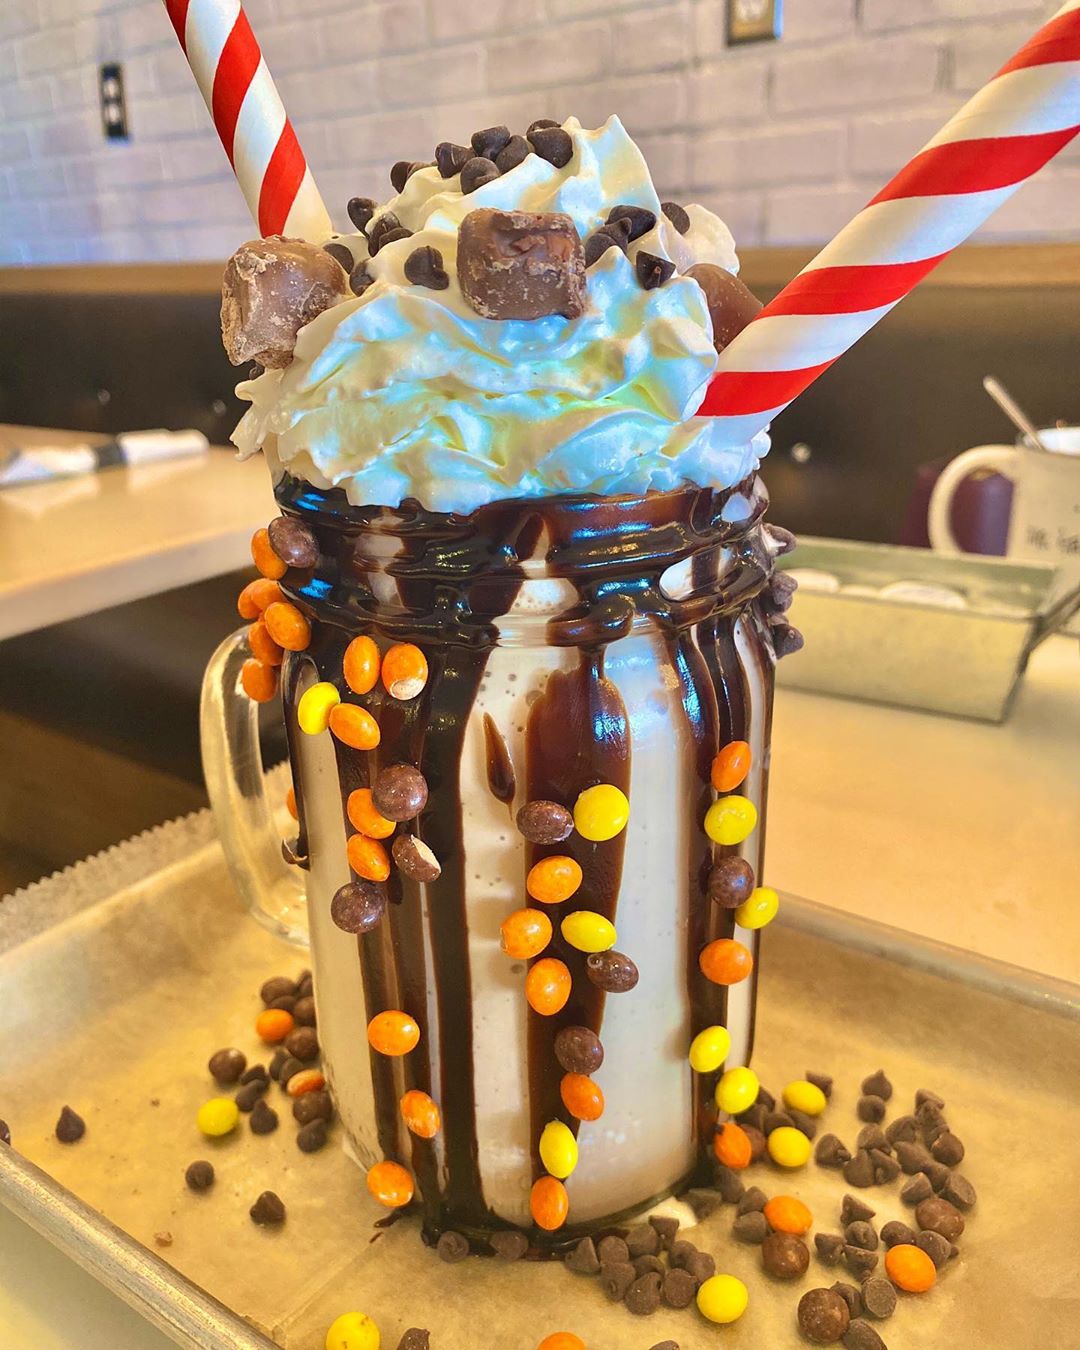 Milkshake Covered in Candy with Two Large Straws from The Place 2 Be. Photo by Instagram user @ctfoodcravings